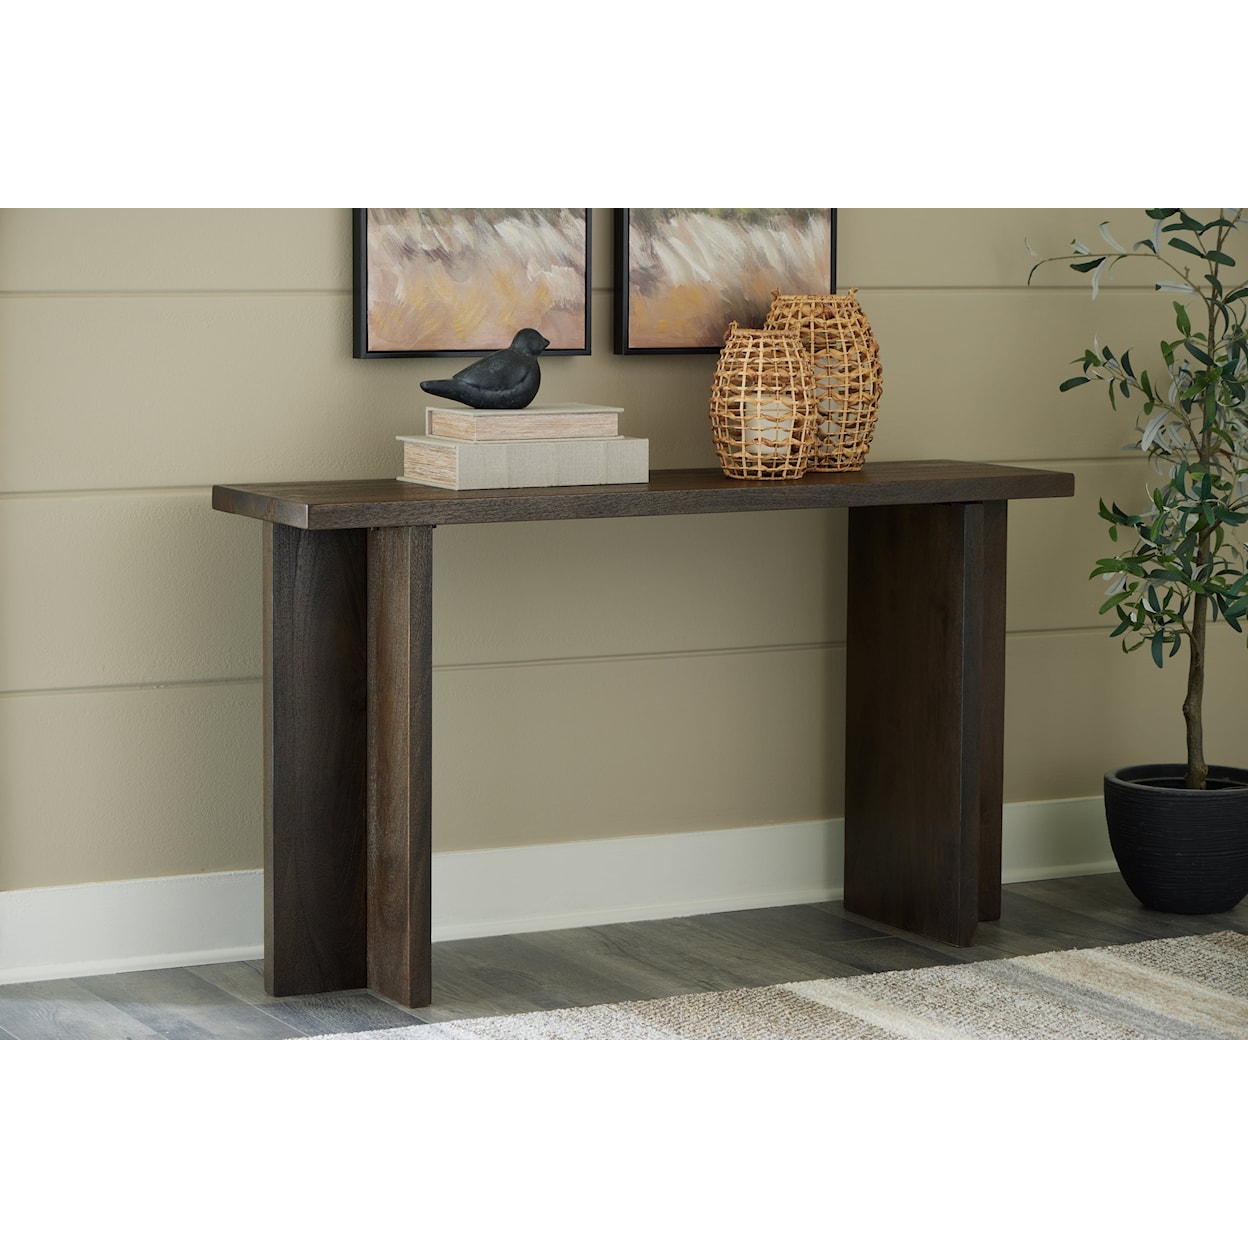 Benchcraft Jalenry Console Sofa Table